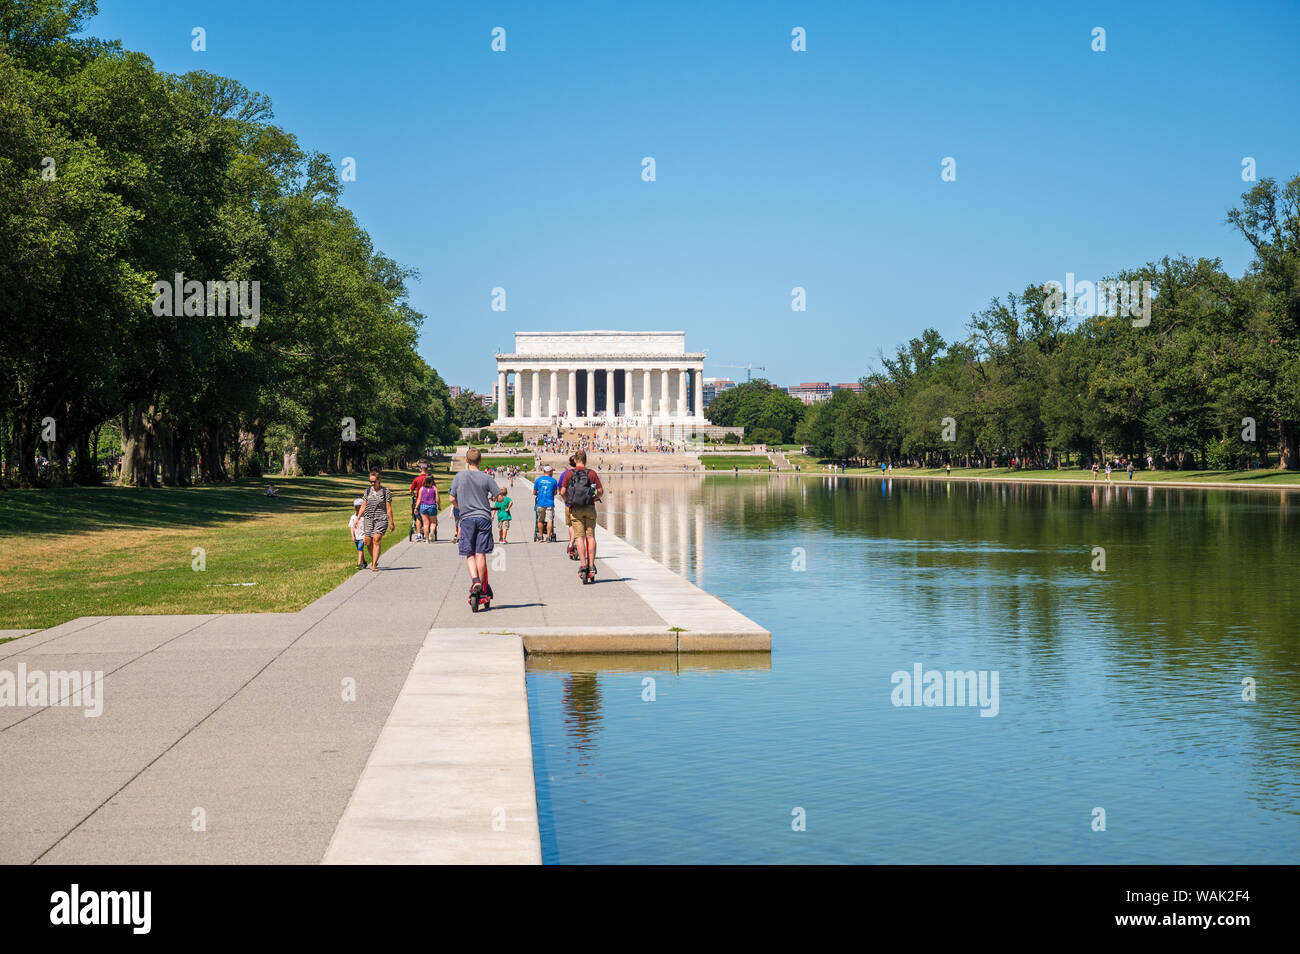 Lincoln Memorial and Reflecting pool, Washington DC, United States of America Stock Photo